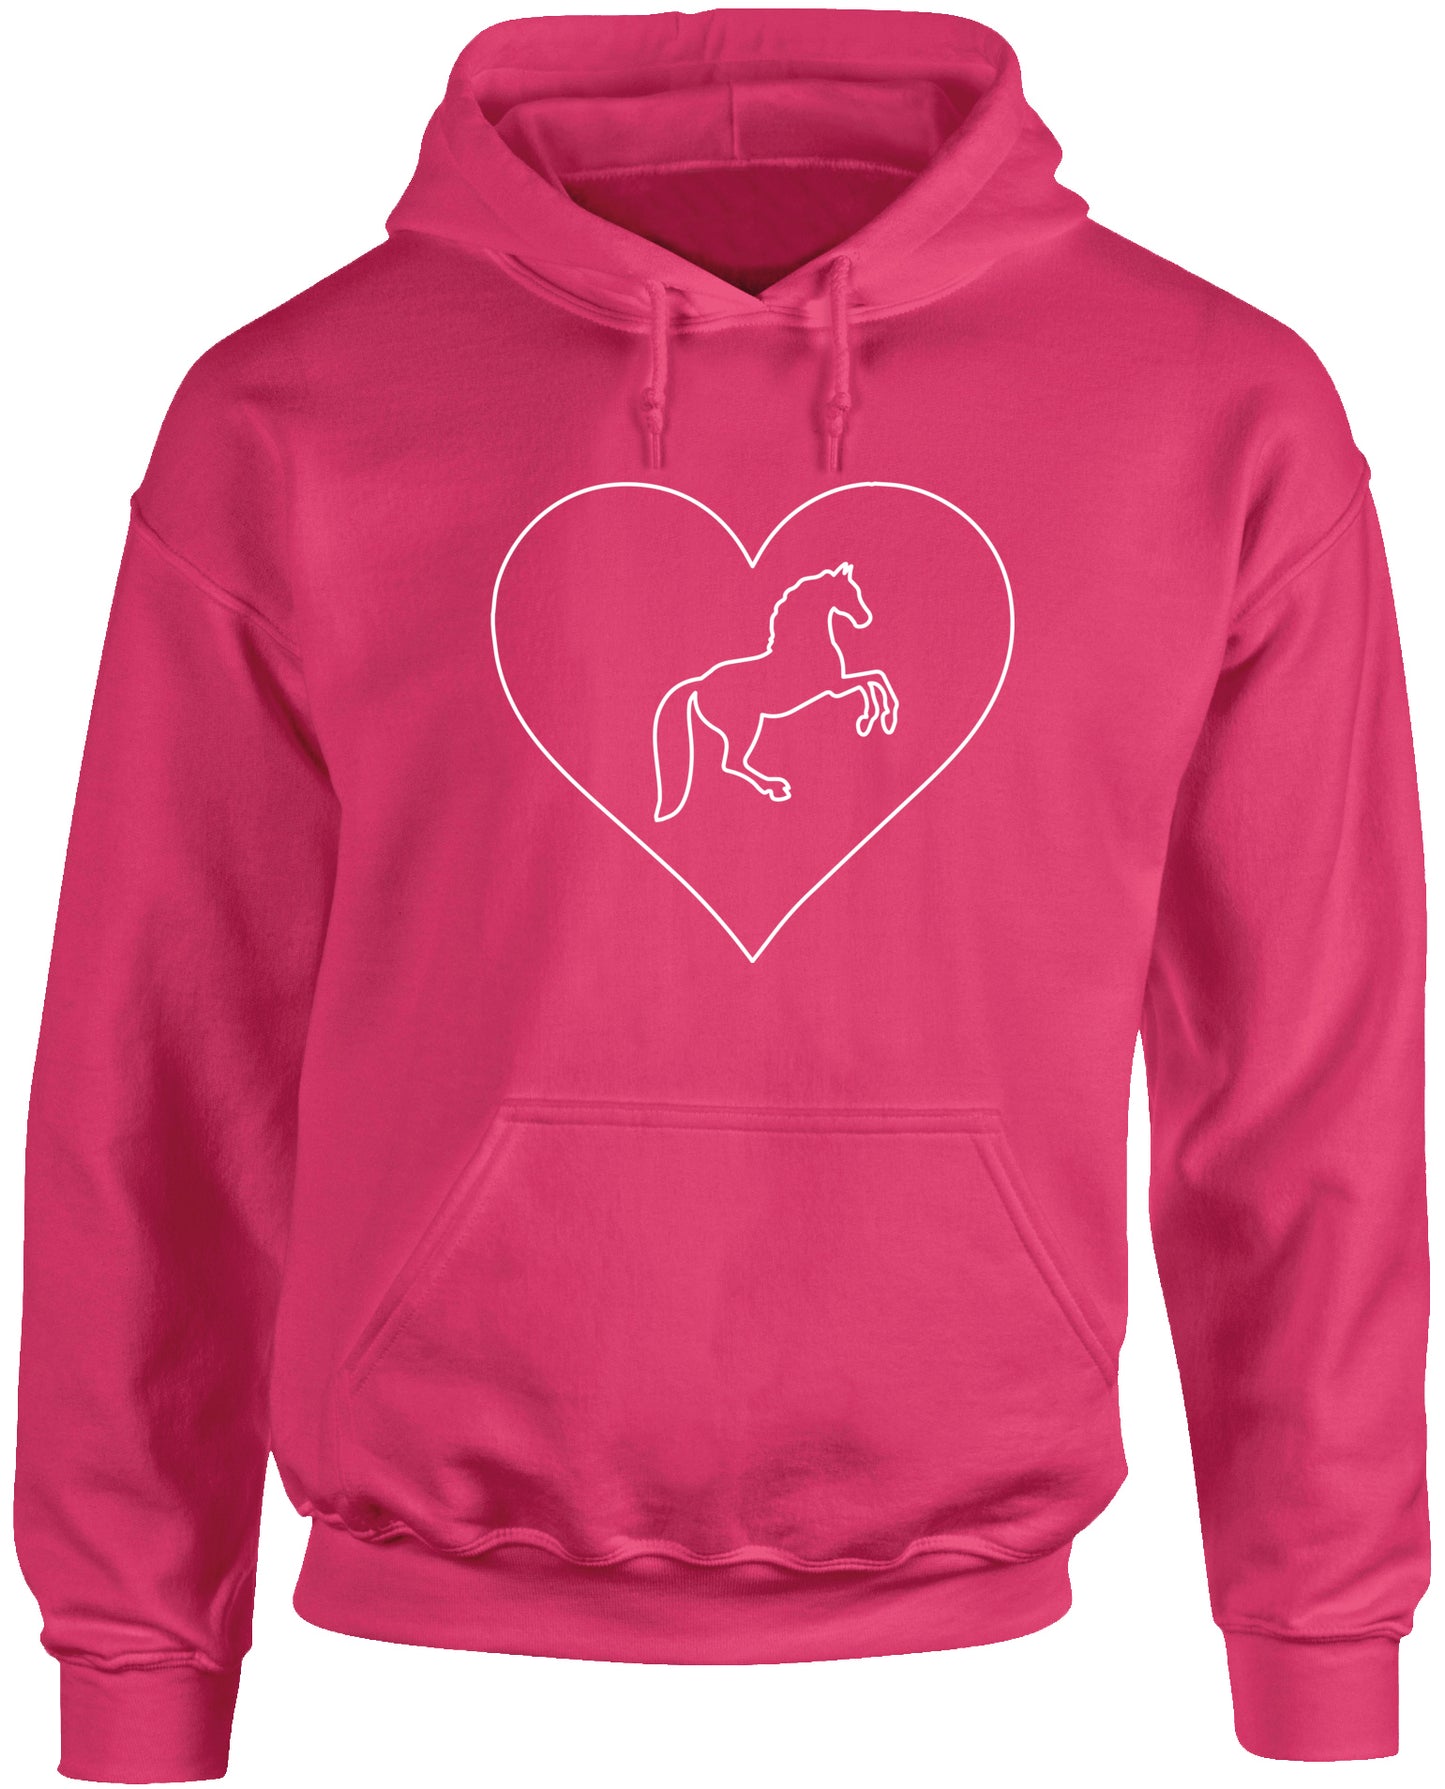 Heart Horse Riding unisex Hoodie hooded top